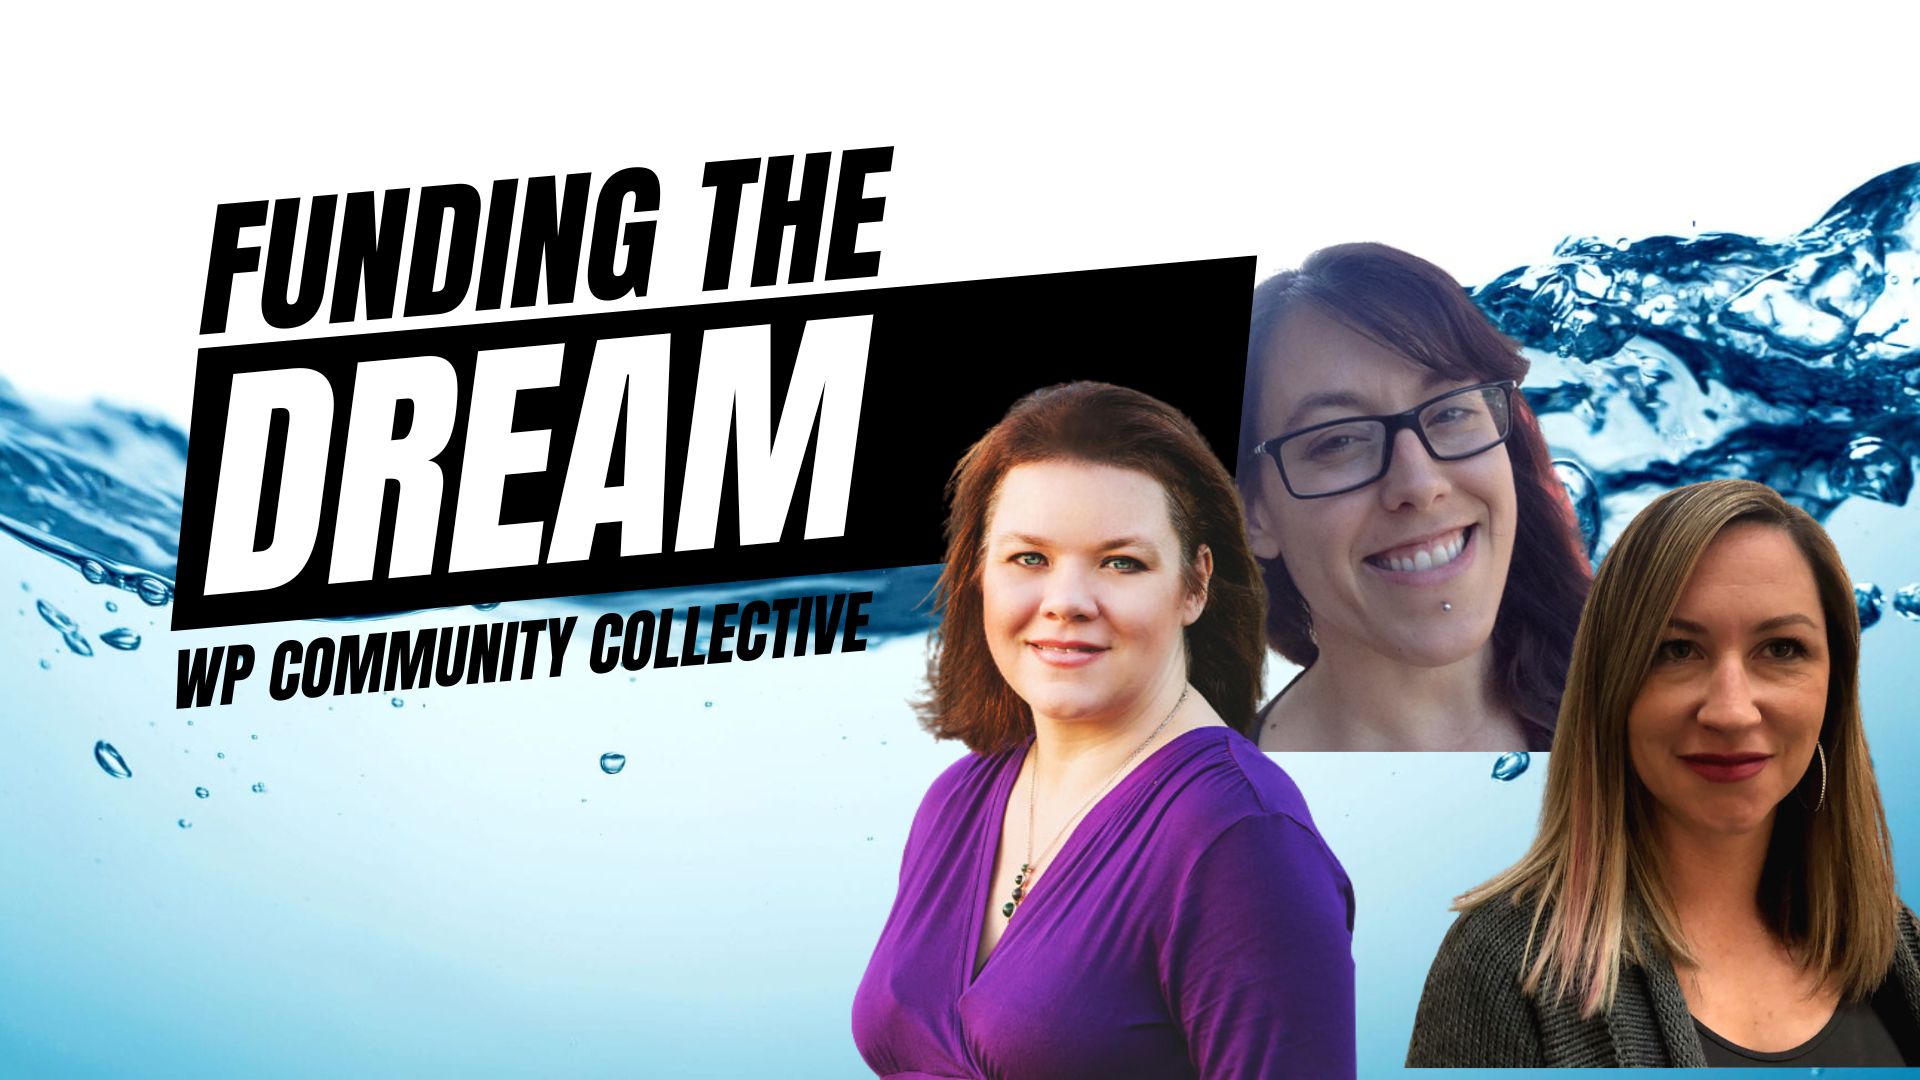 EP437 – Funding the Dream with the WP Community Collective